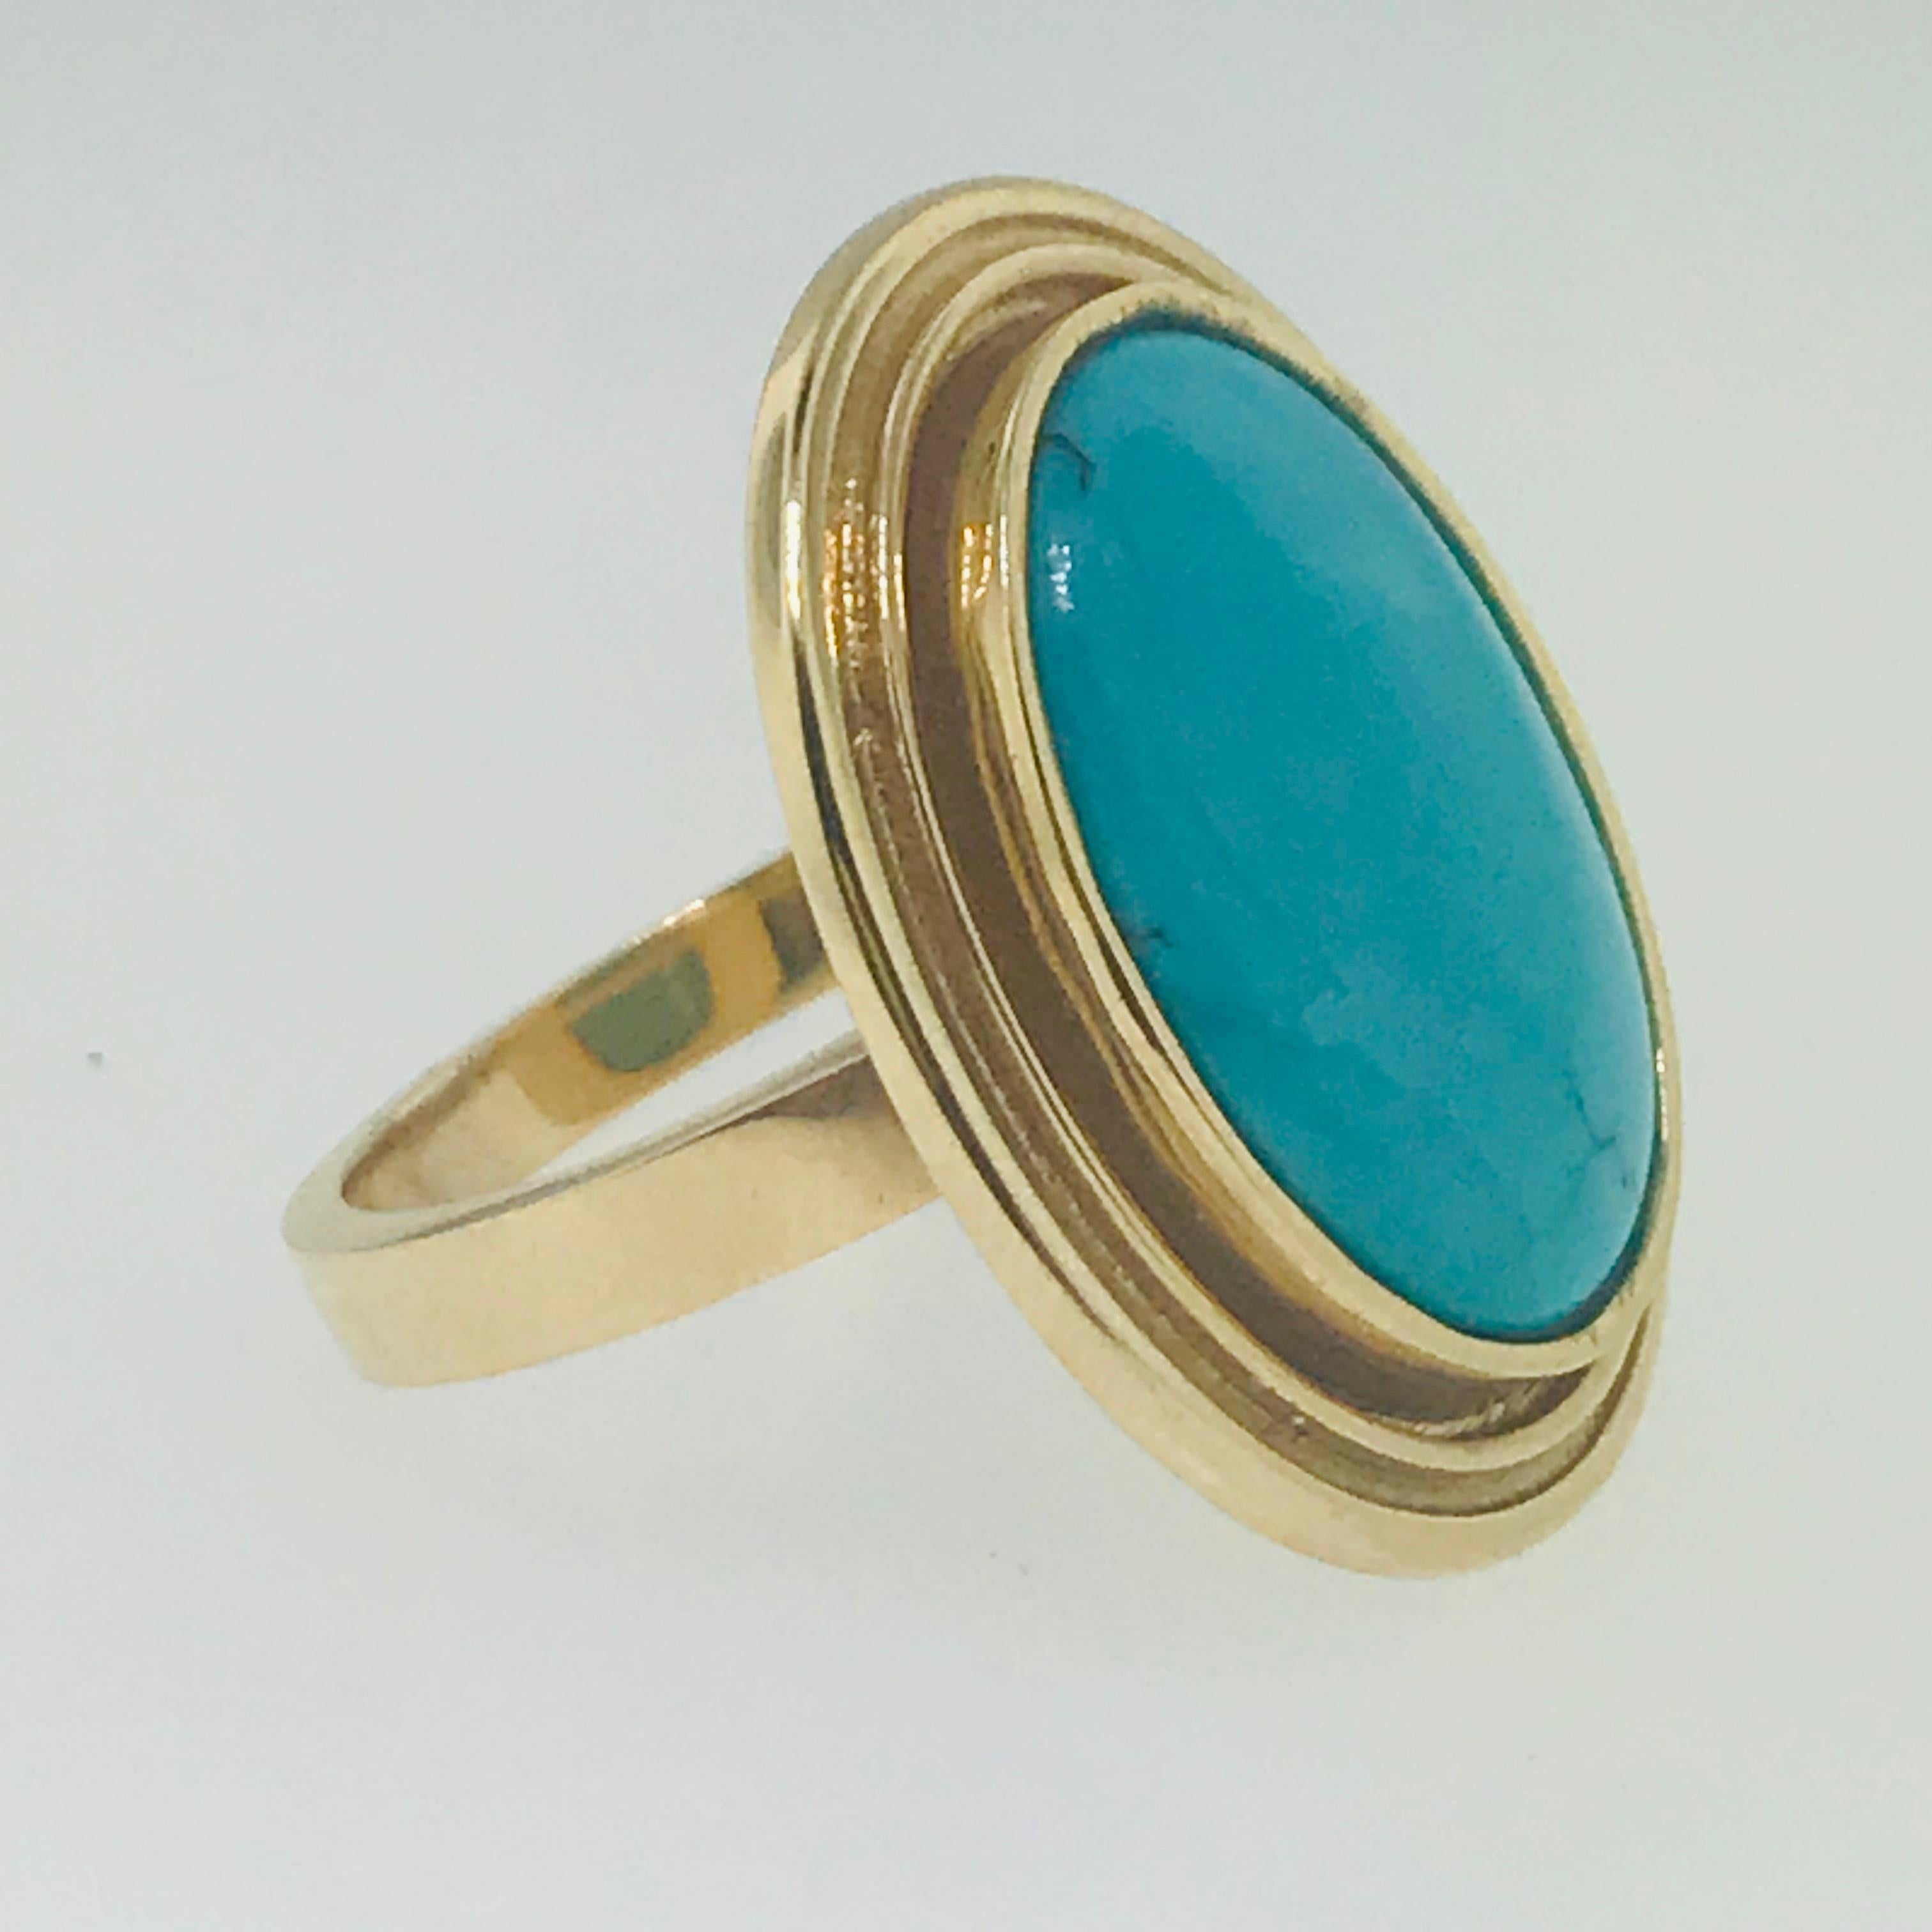 Oval Cut 3 Carat Genuine Persian Turquoise Unique Gold Fashion Ring in 14 Karat Gold